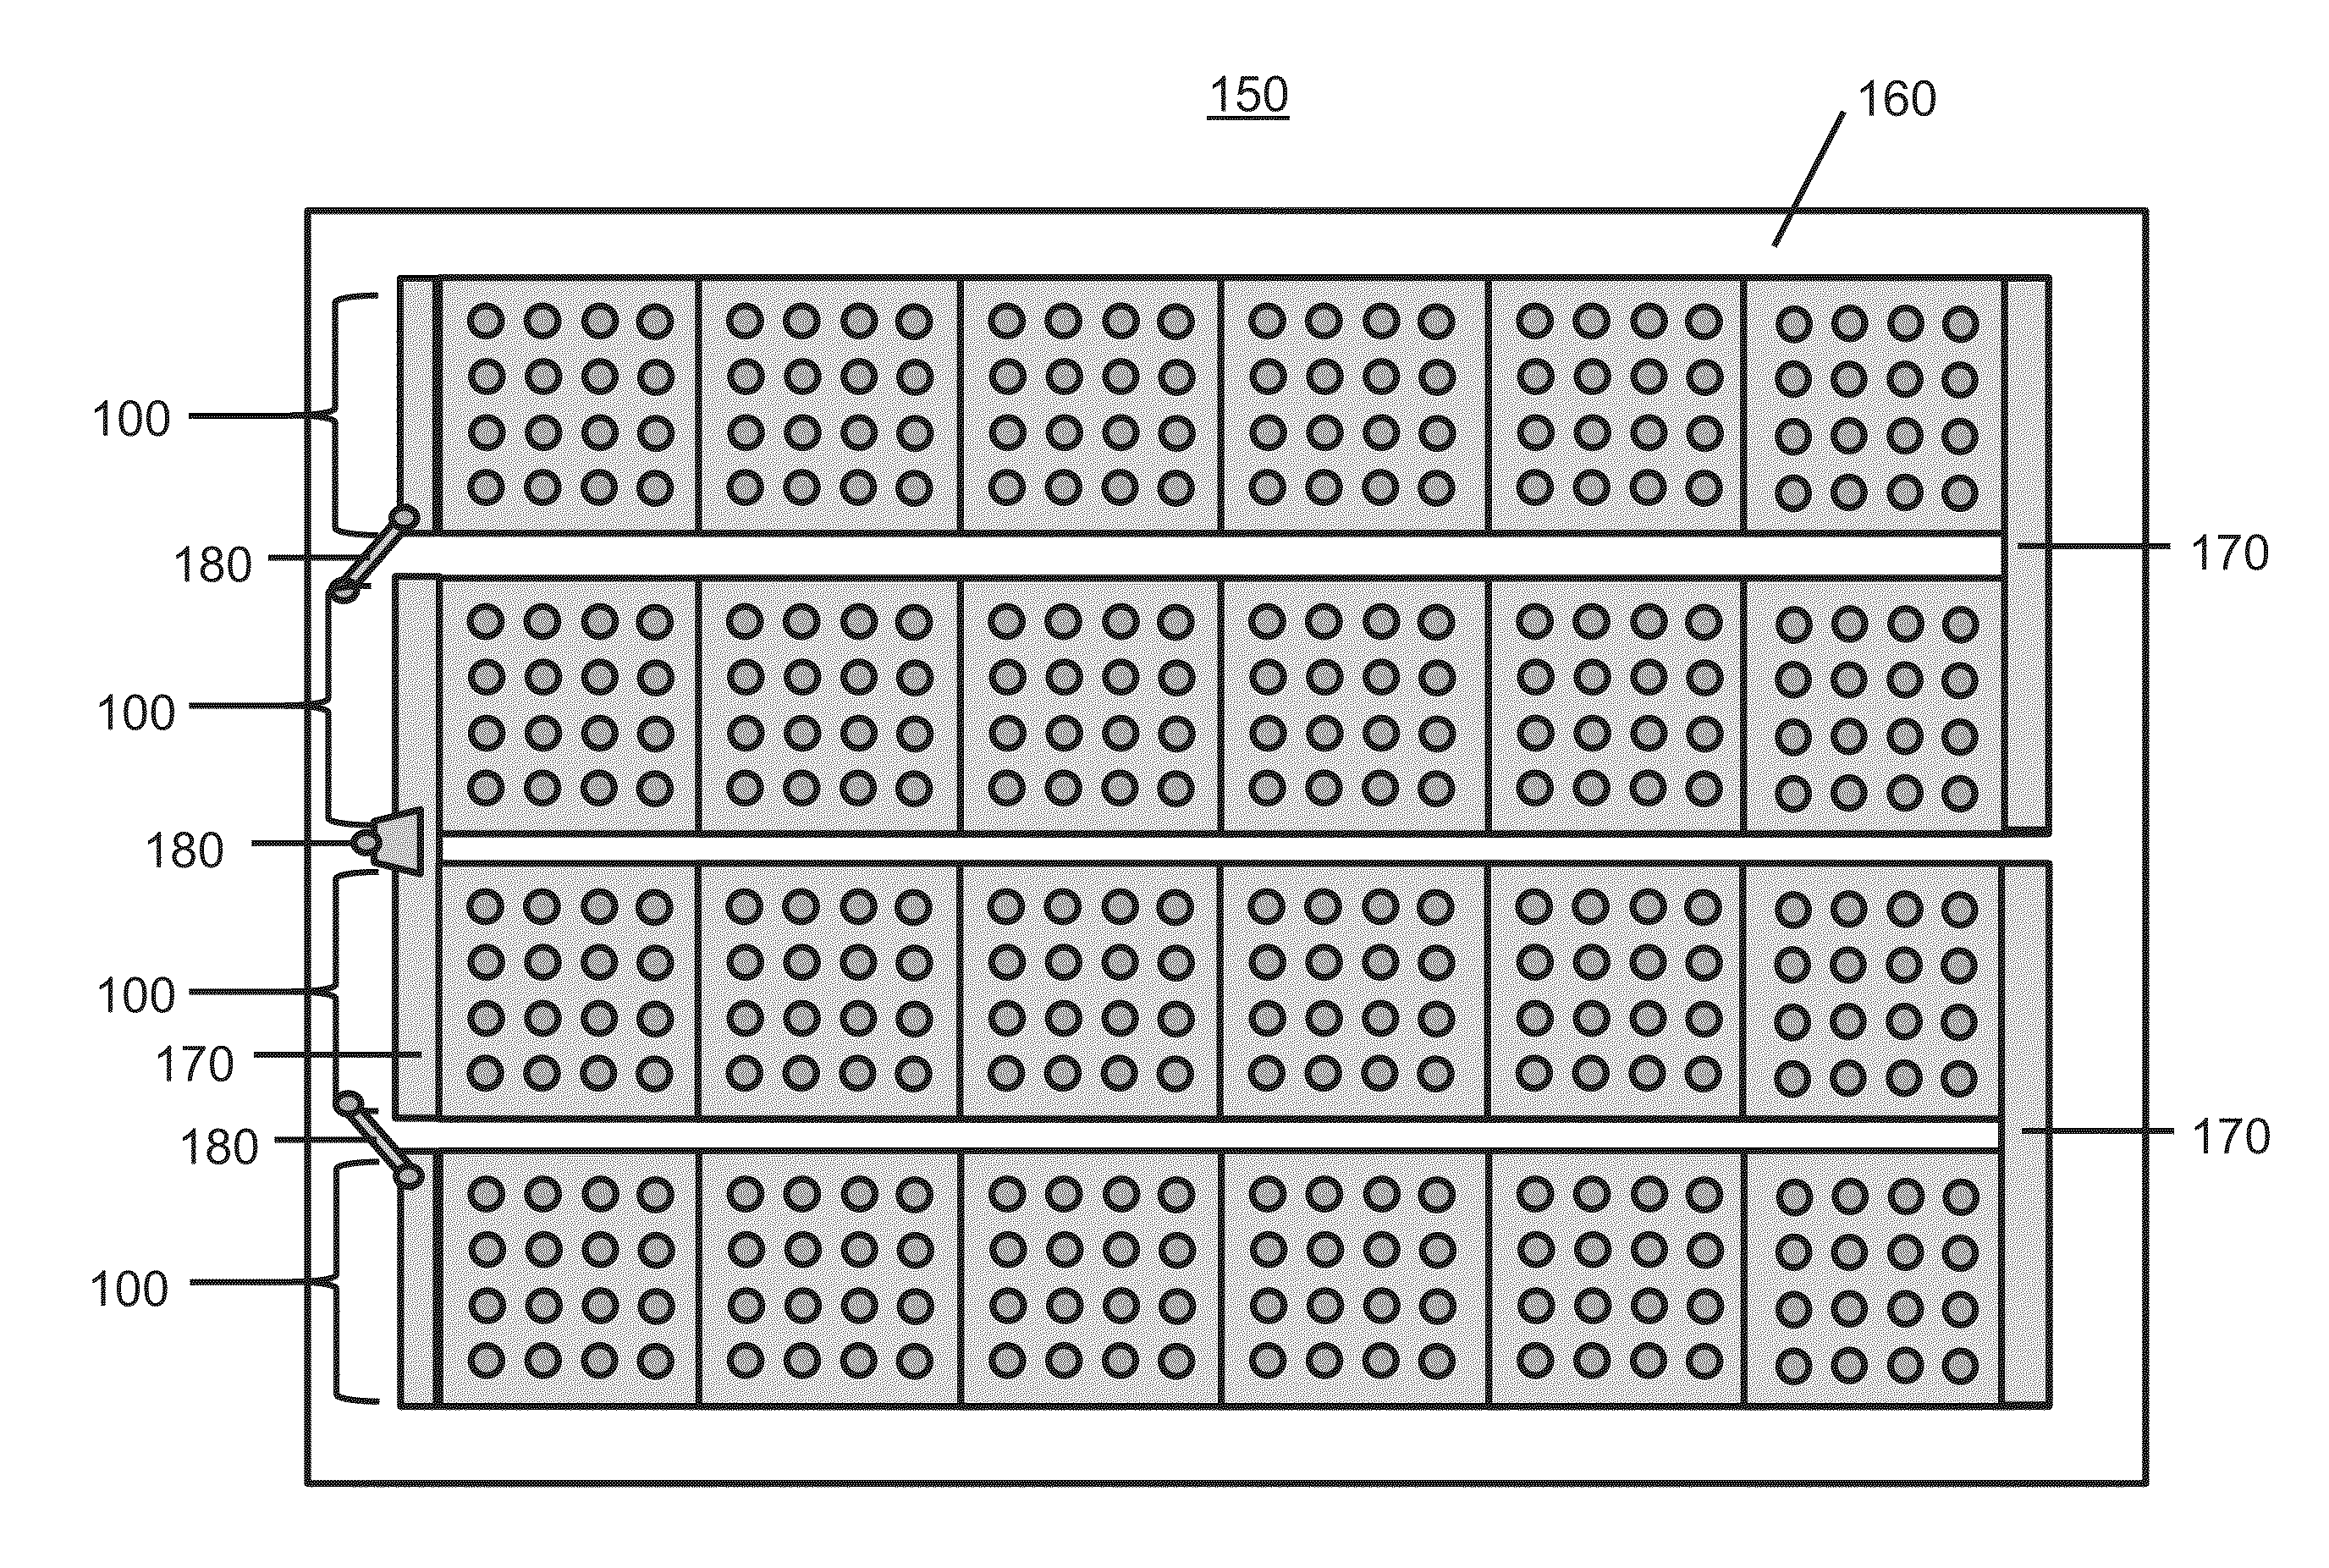 Interdigitated foil interconnect for rear-contact solar cells